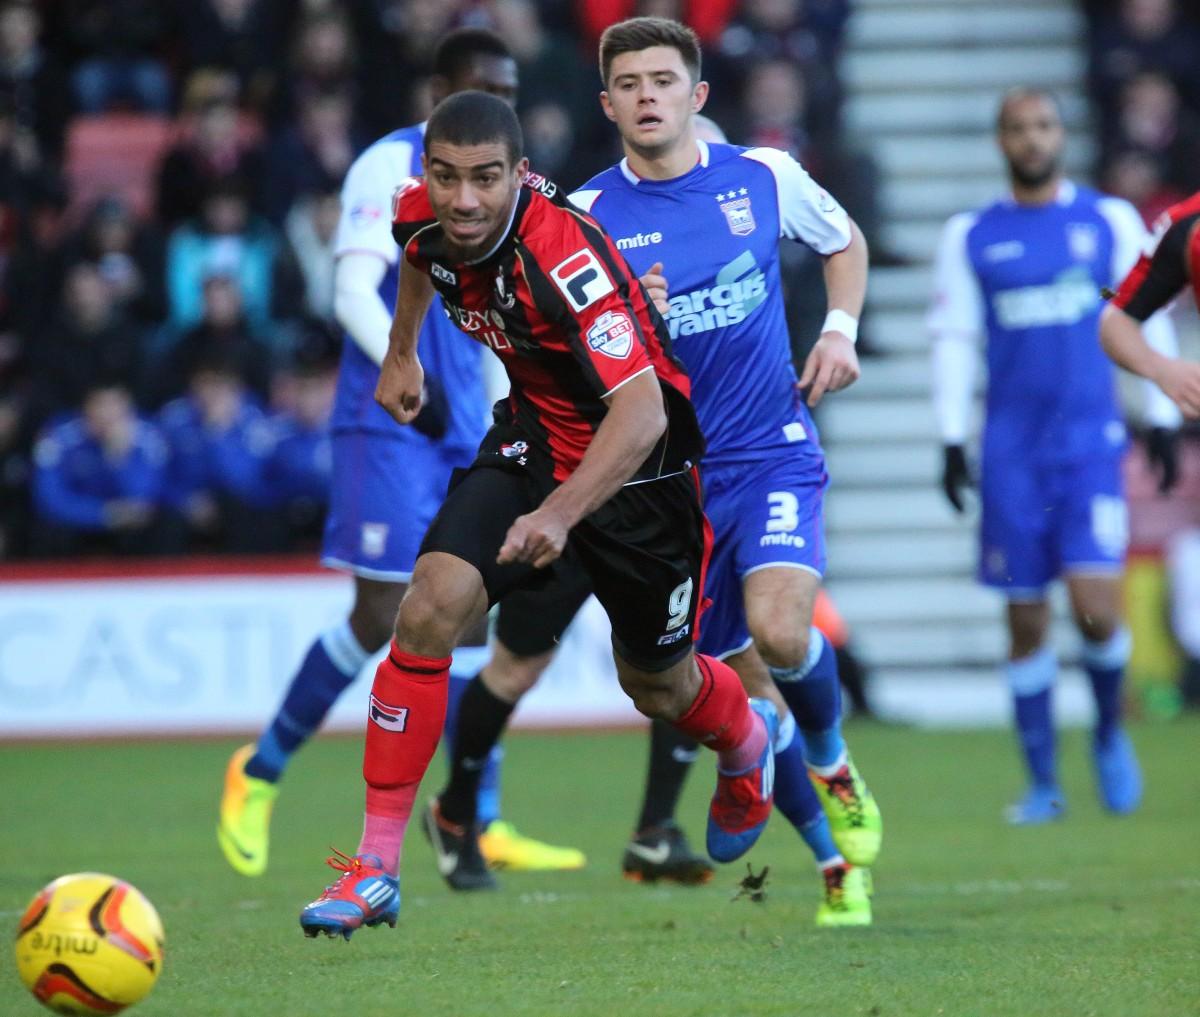 All our pictures from AFC Bournemouth v Ipswich Town at Dean Court on 29th December, 2013